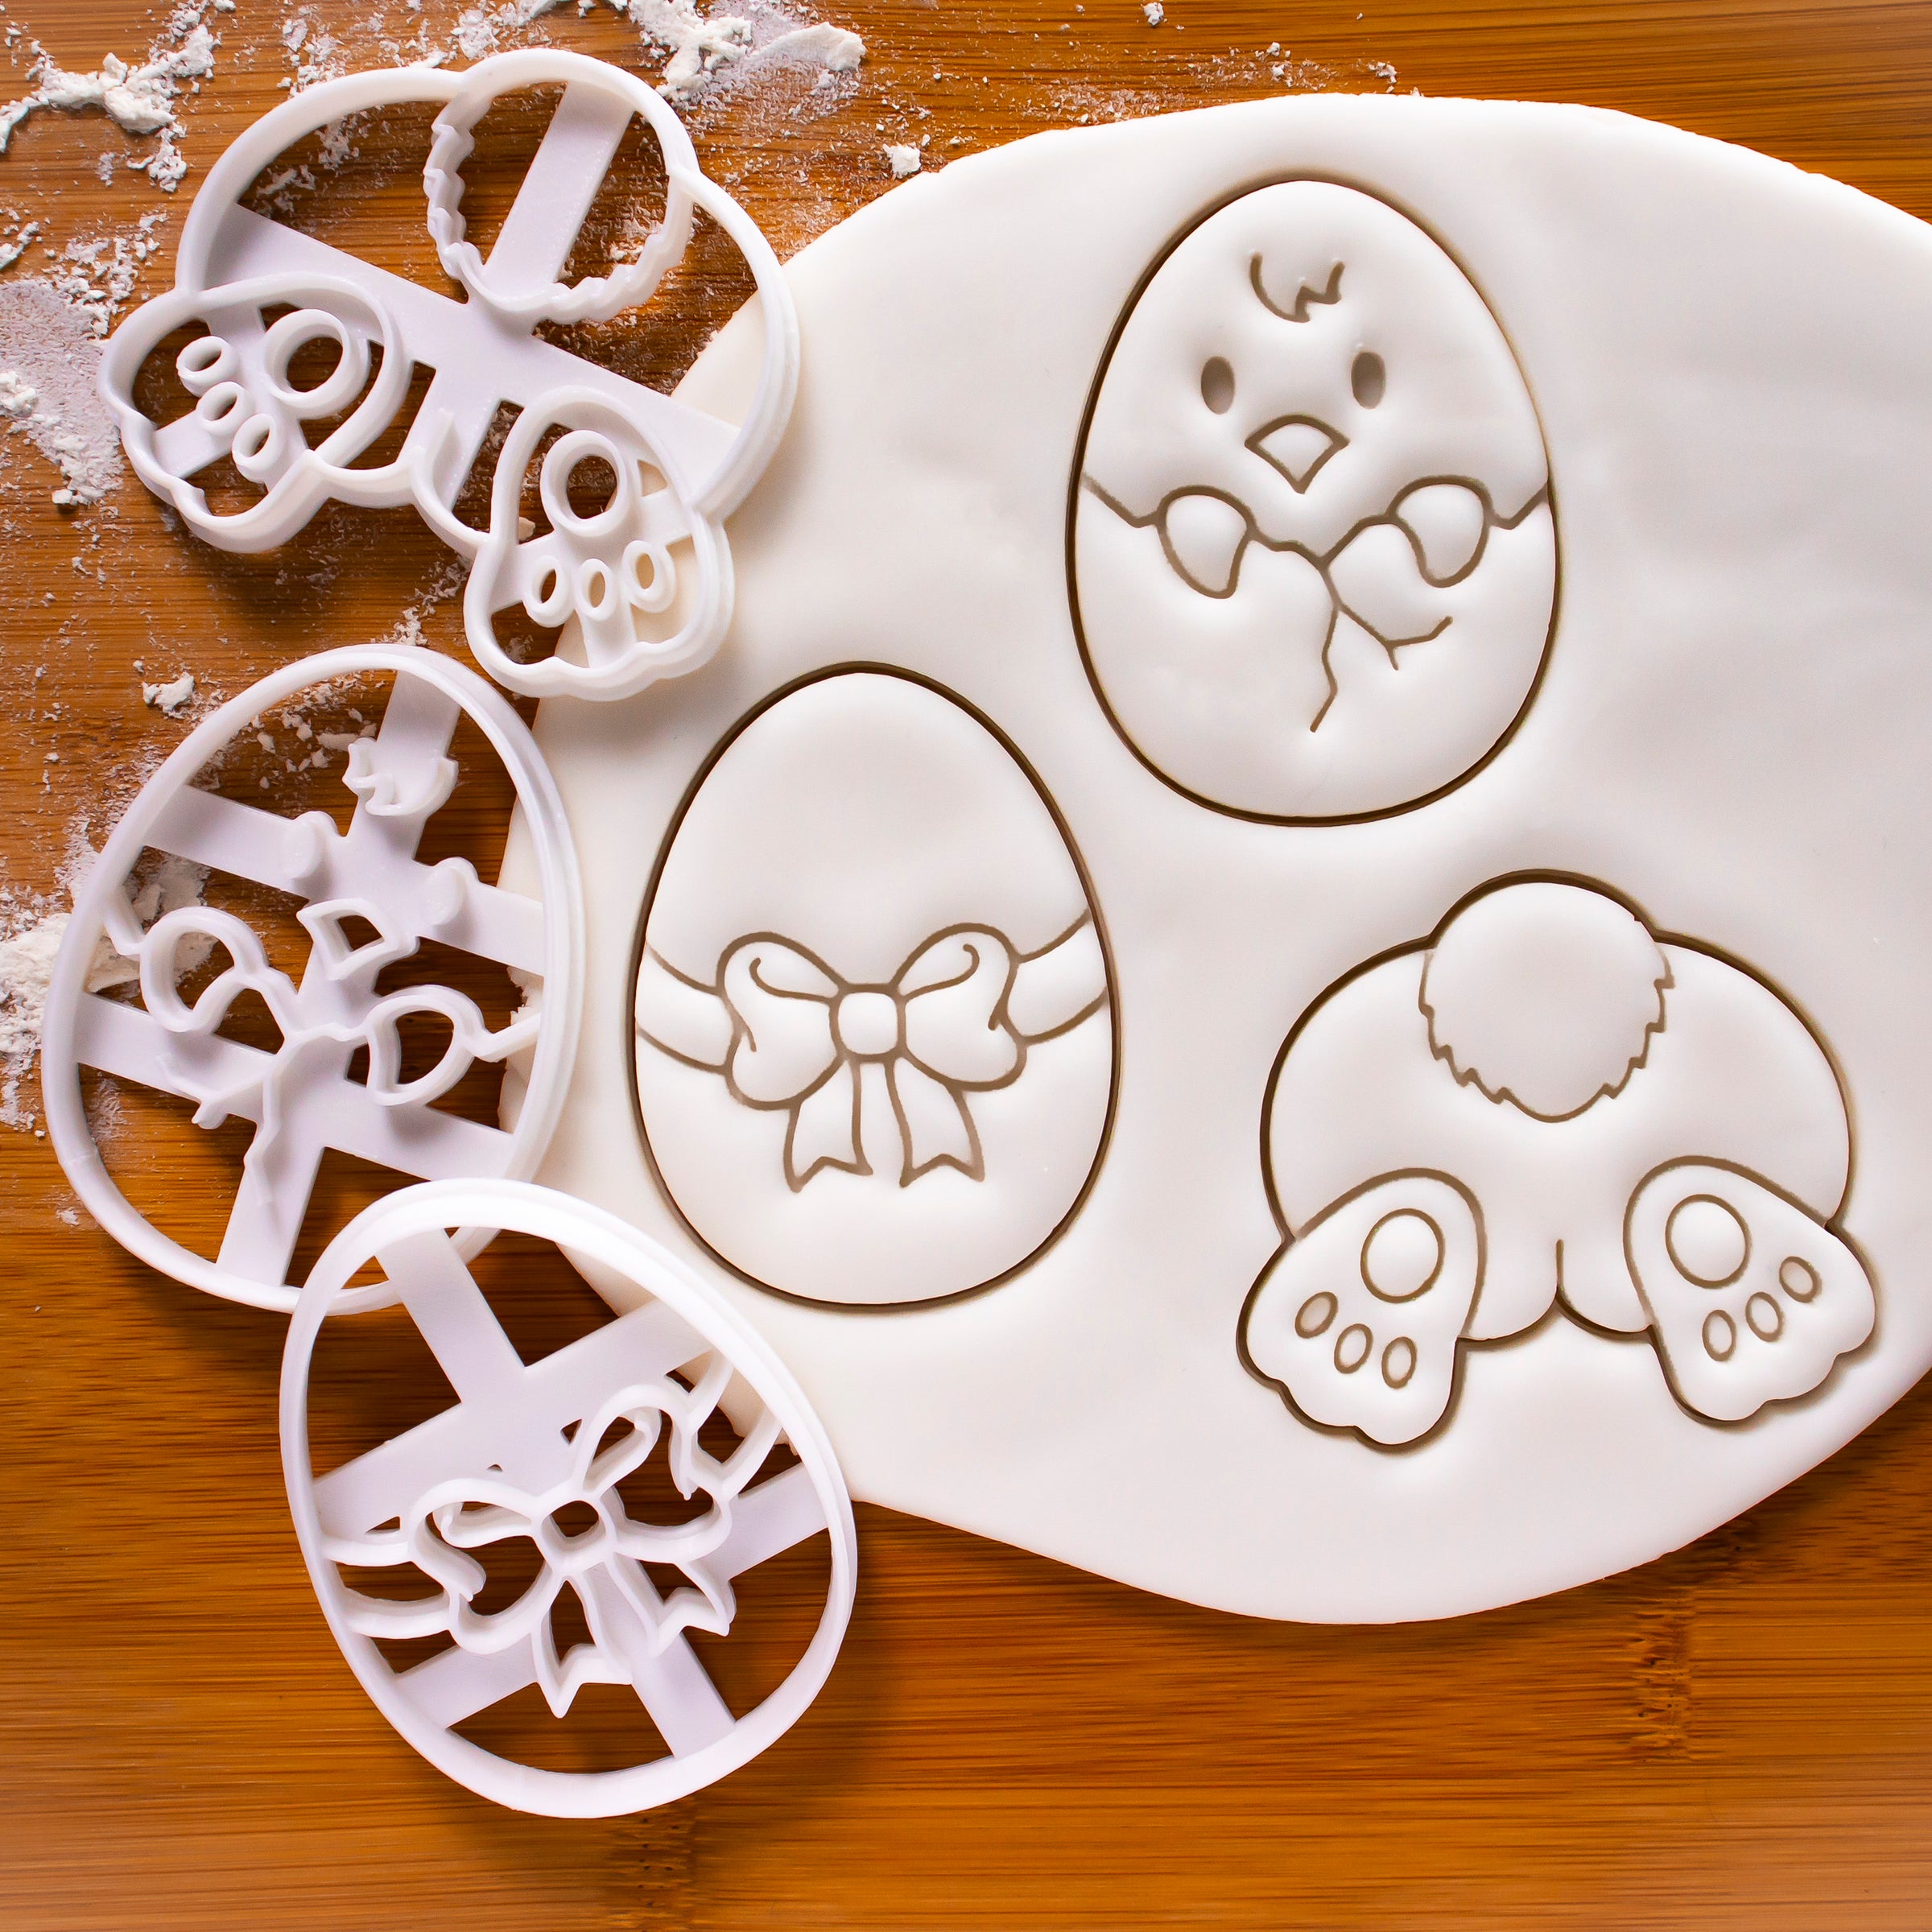 Set of 3 Easter themed Cookie Cutters: Bunny Butt, Easter Egg, and Easter Chick